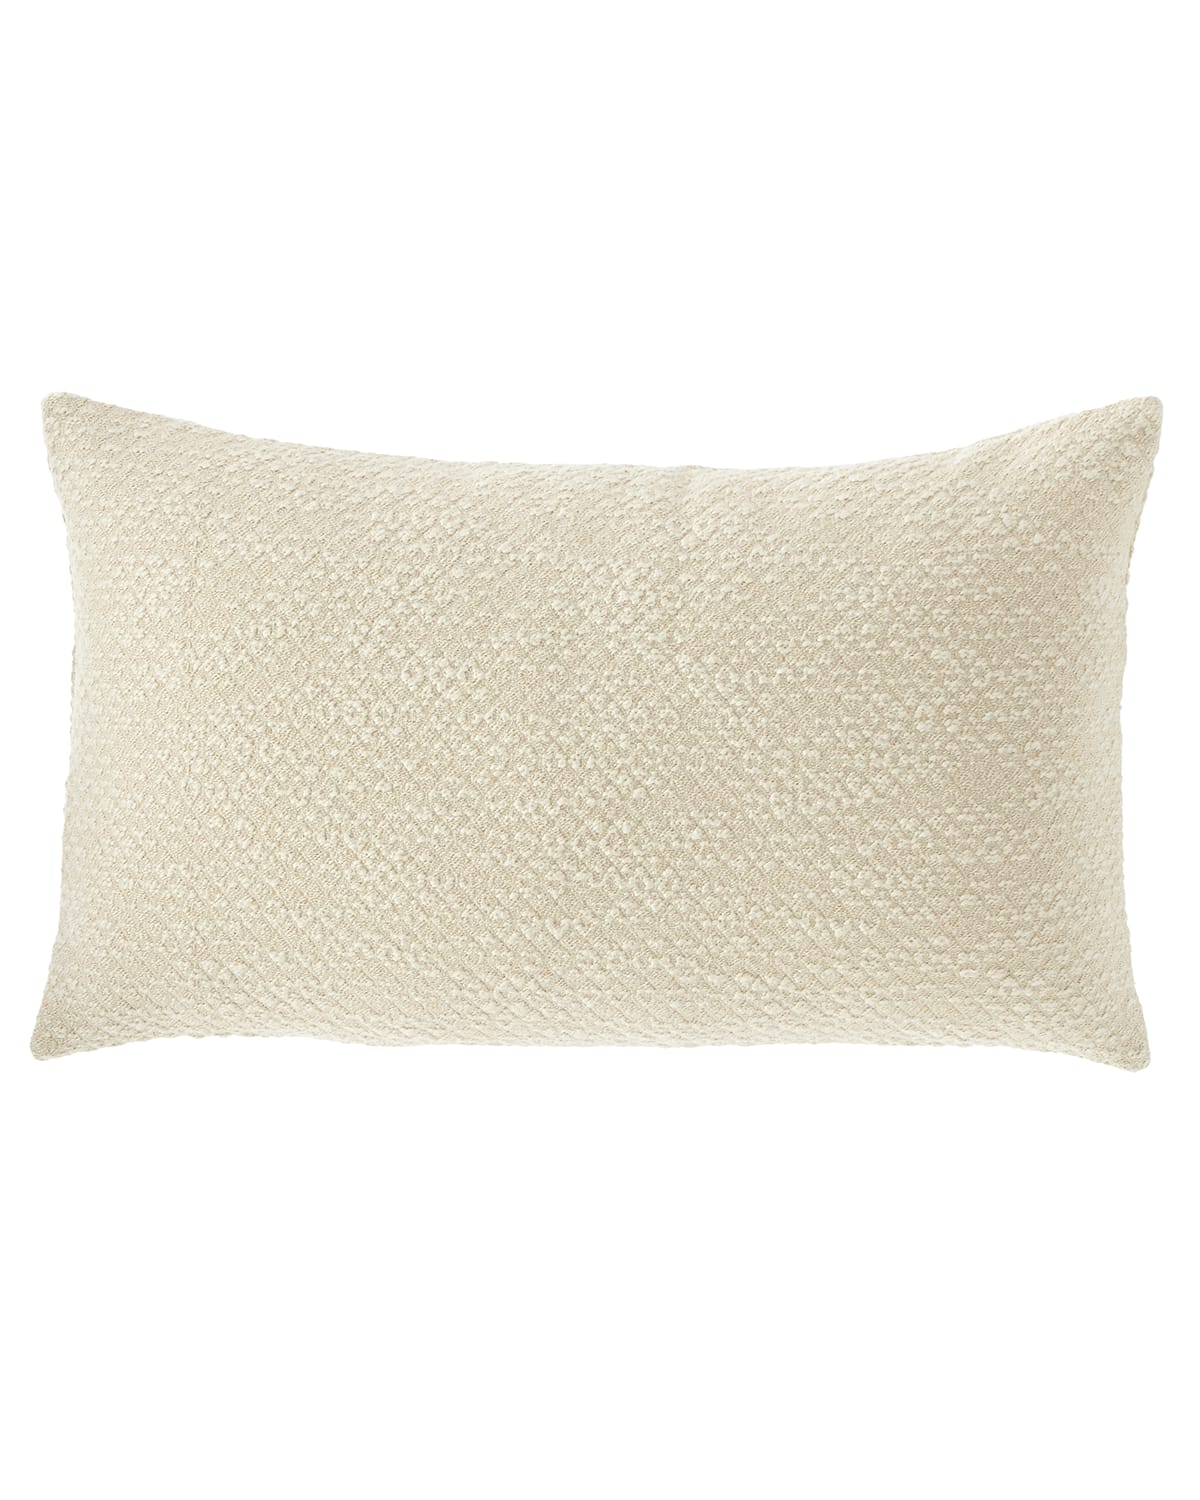 Image Amity Home Orlana Oblong Pillow